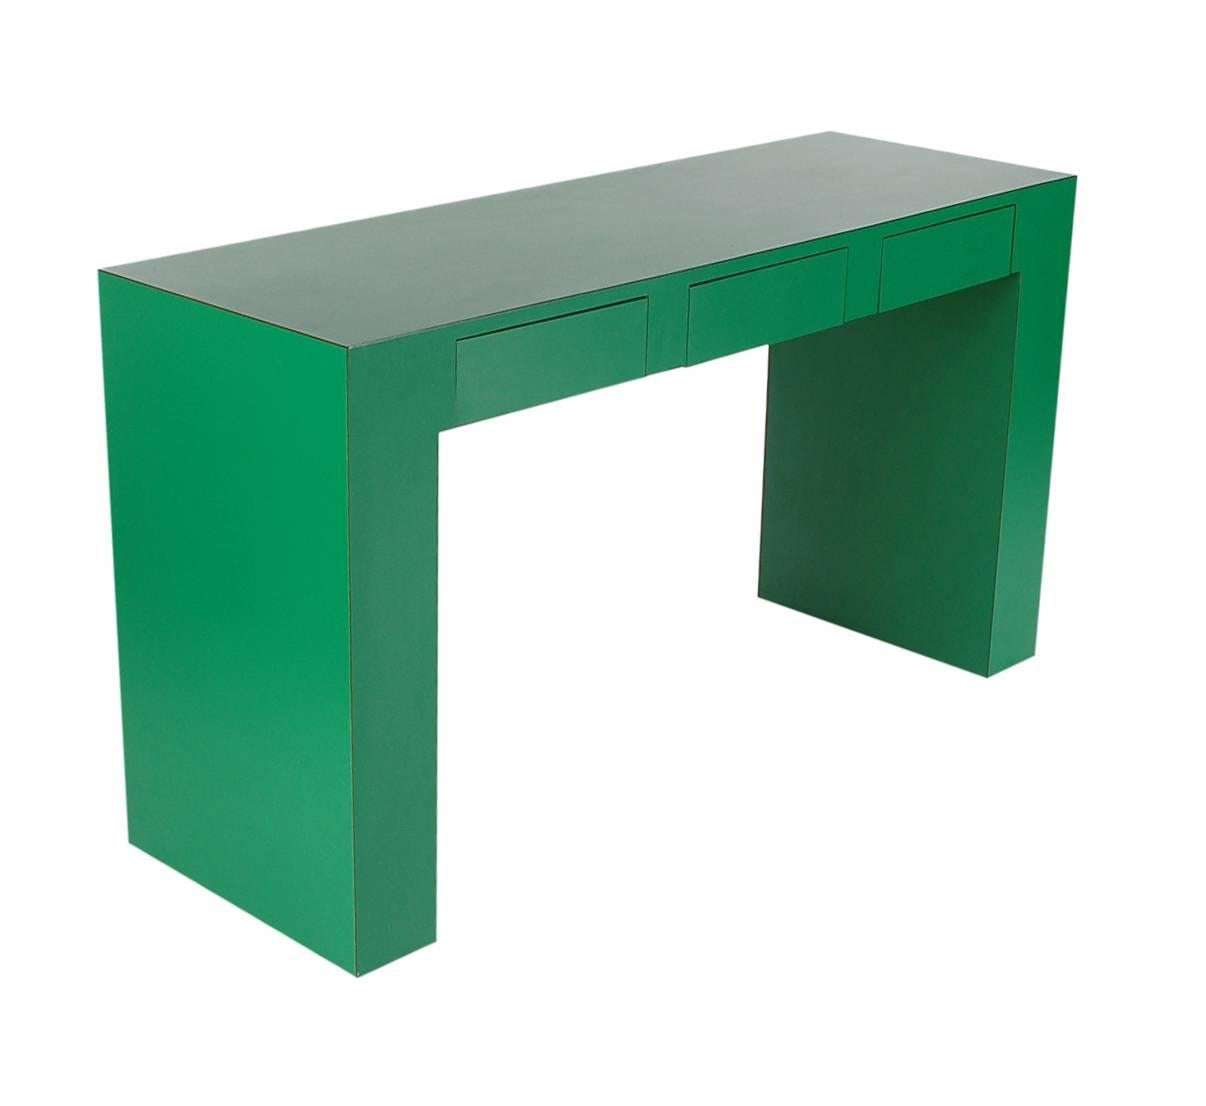 A uniquely thick proportioned console table or desk. It is very well made and features an emerald green laminate finish with three drawers.

In the style of Milo Baughman or Karl Springer.